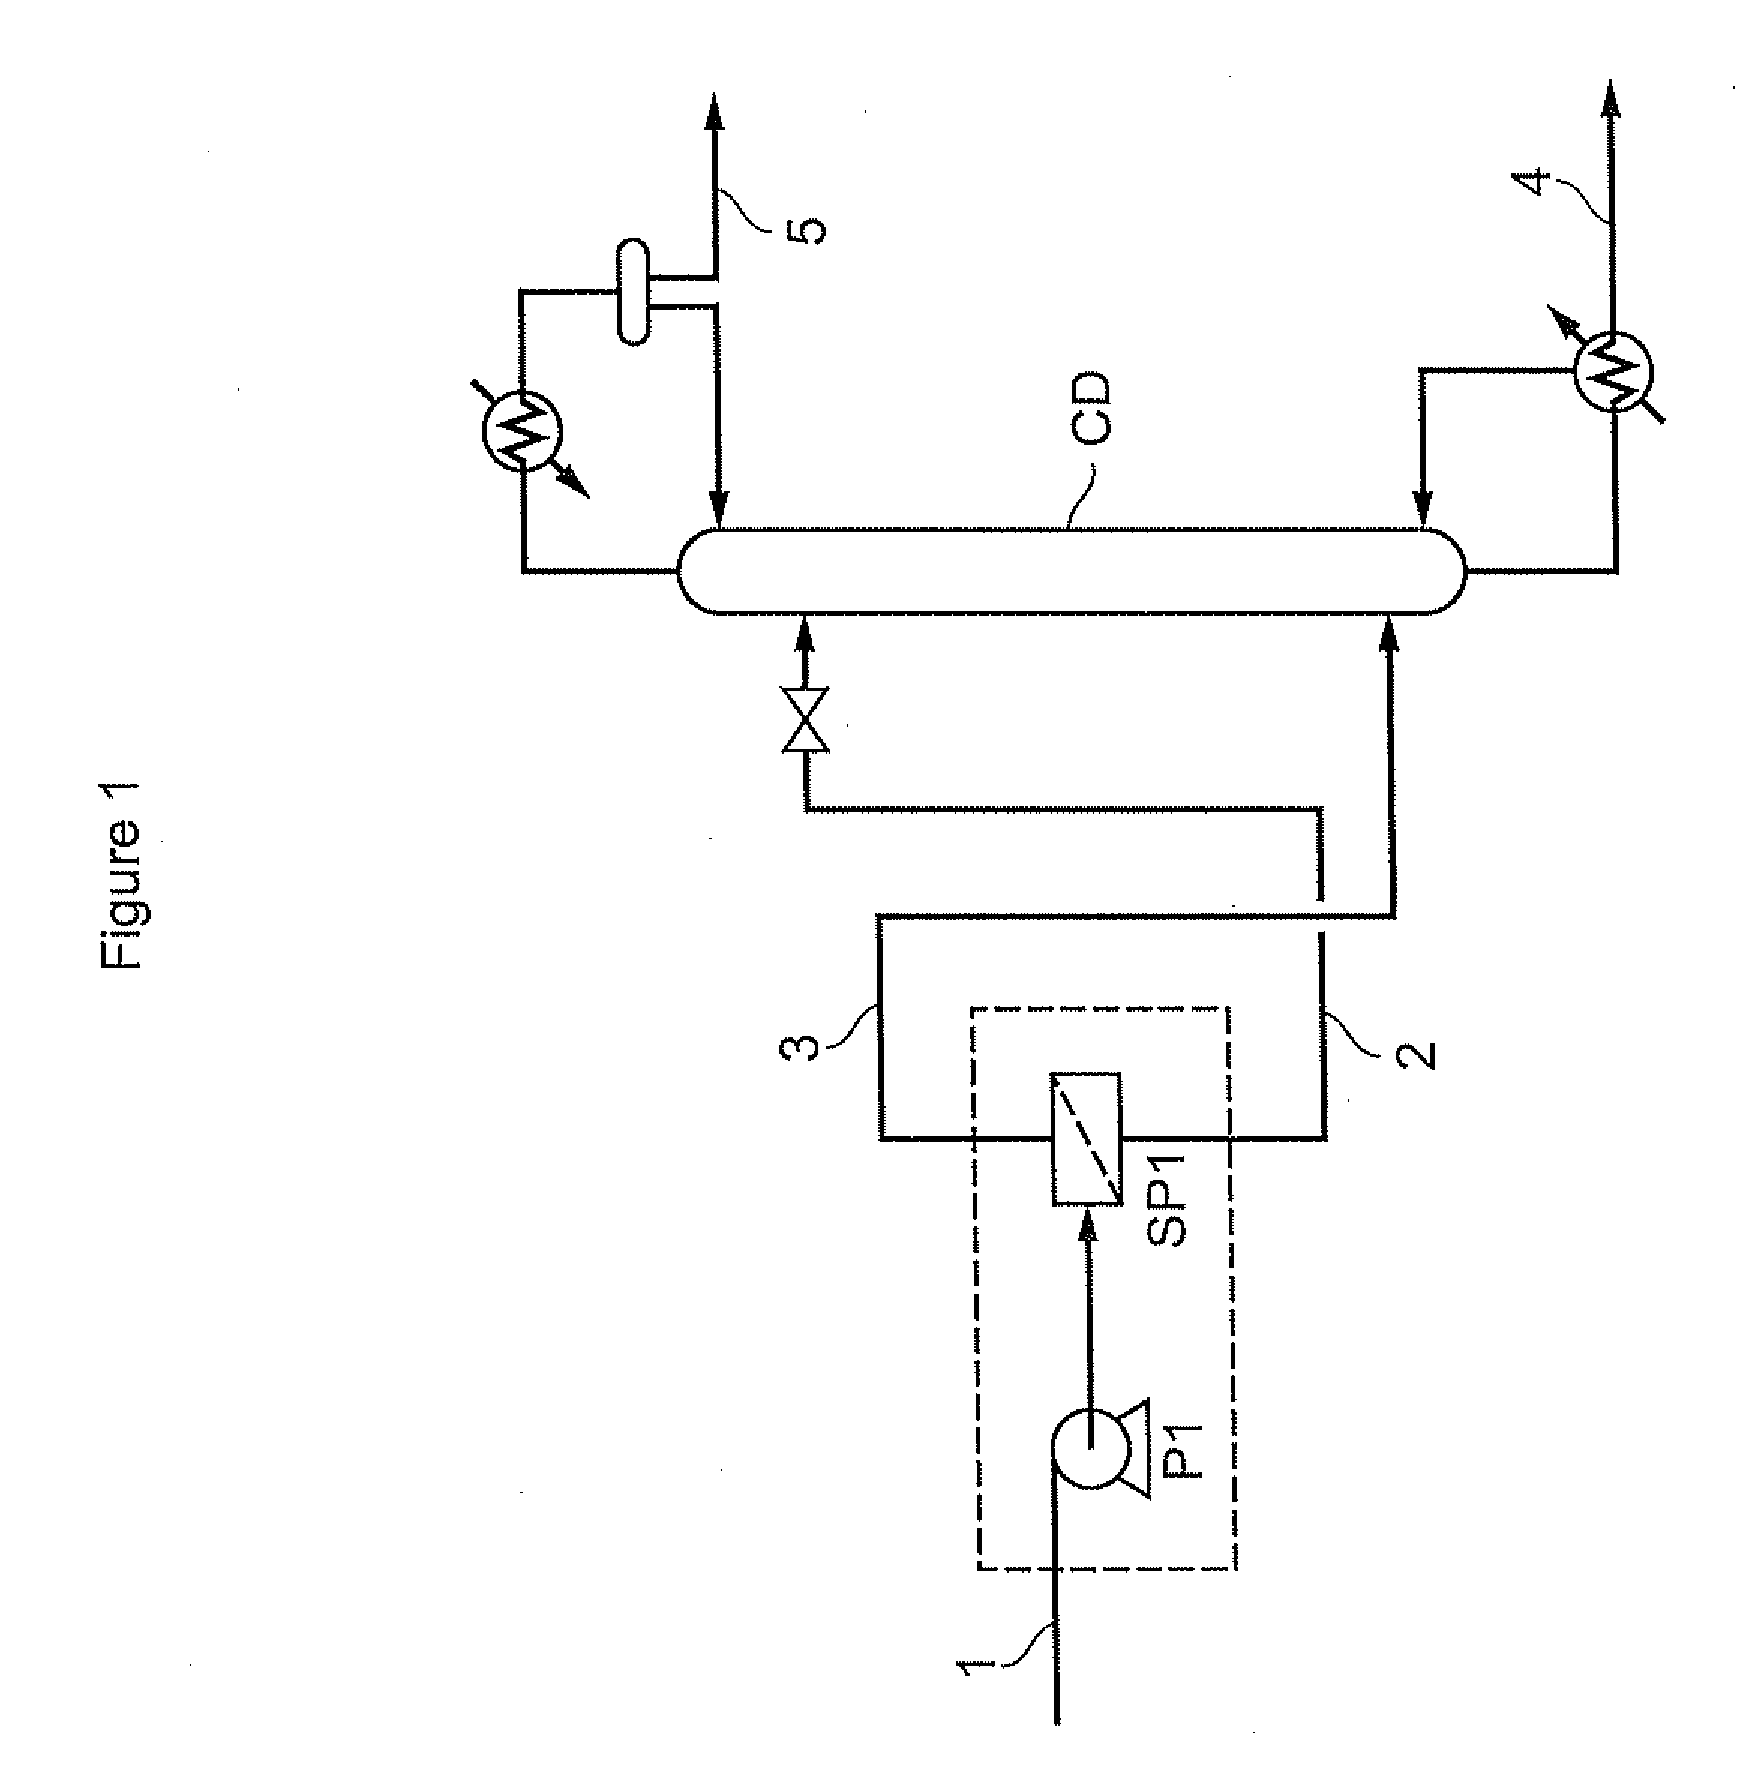 Process for separating propane and propylene using a distillation column and a membrane separation column